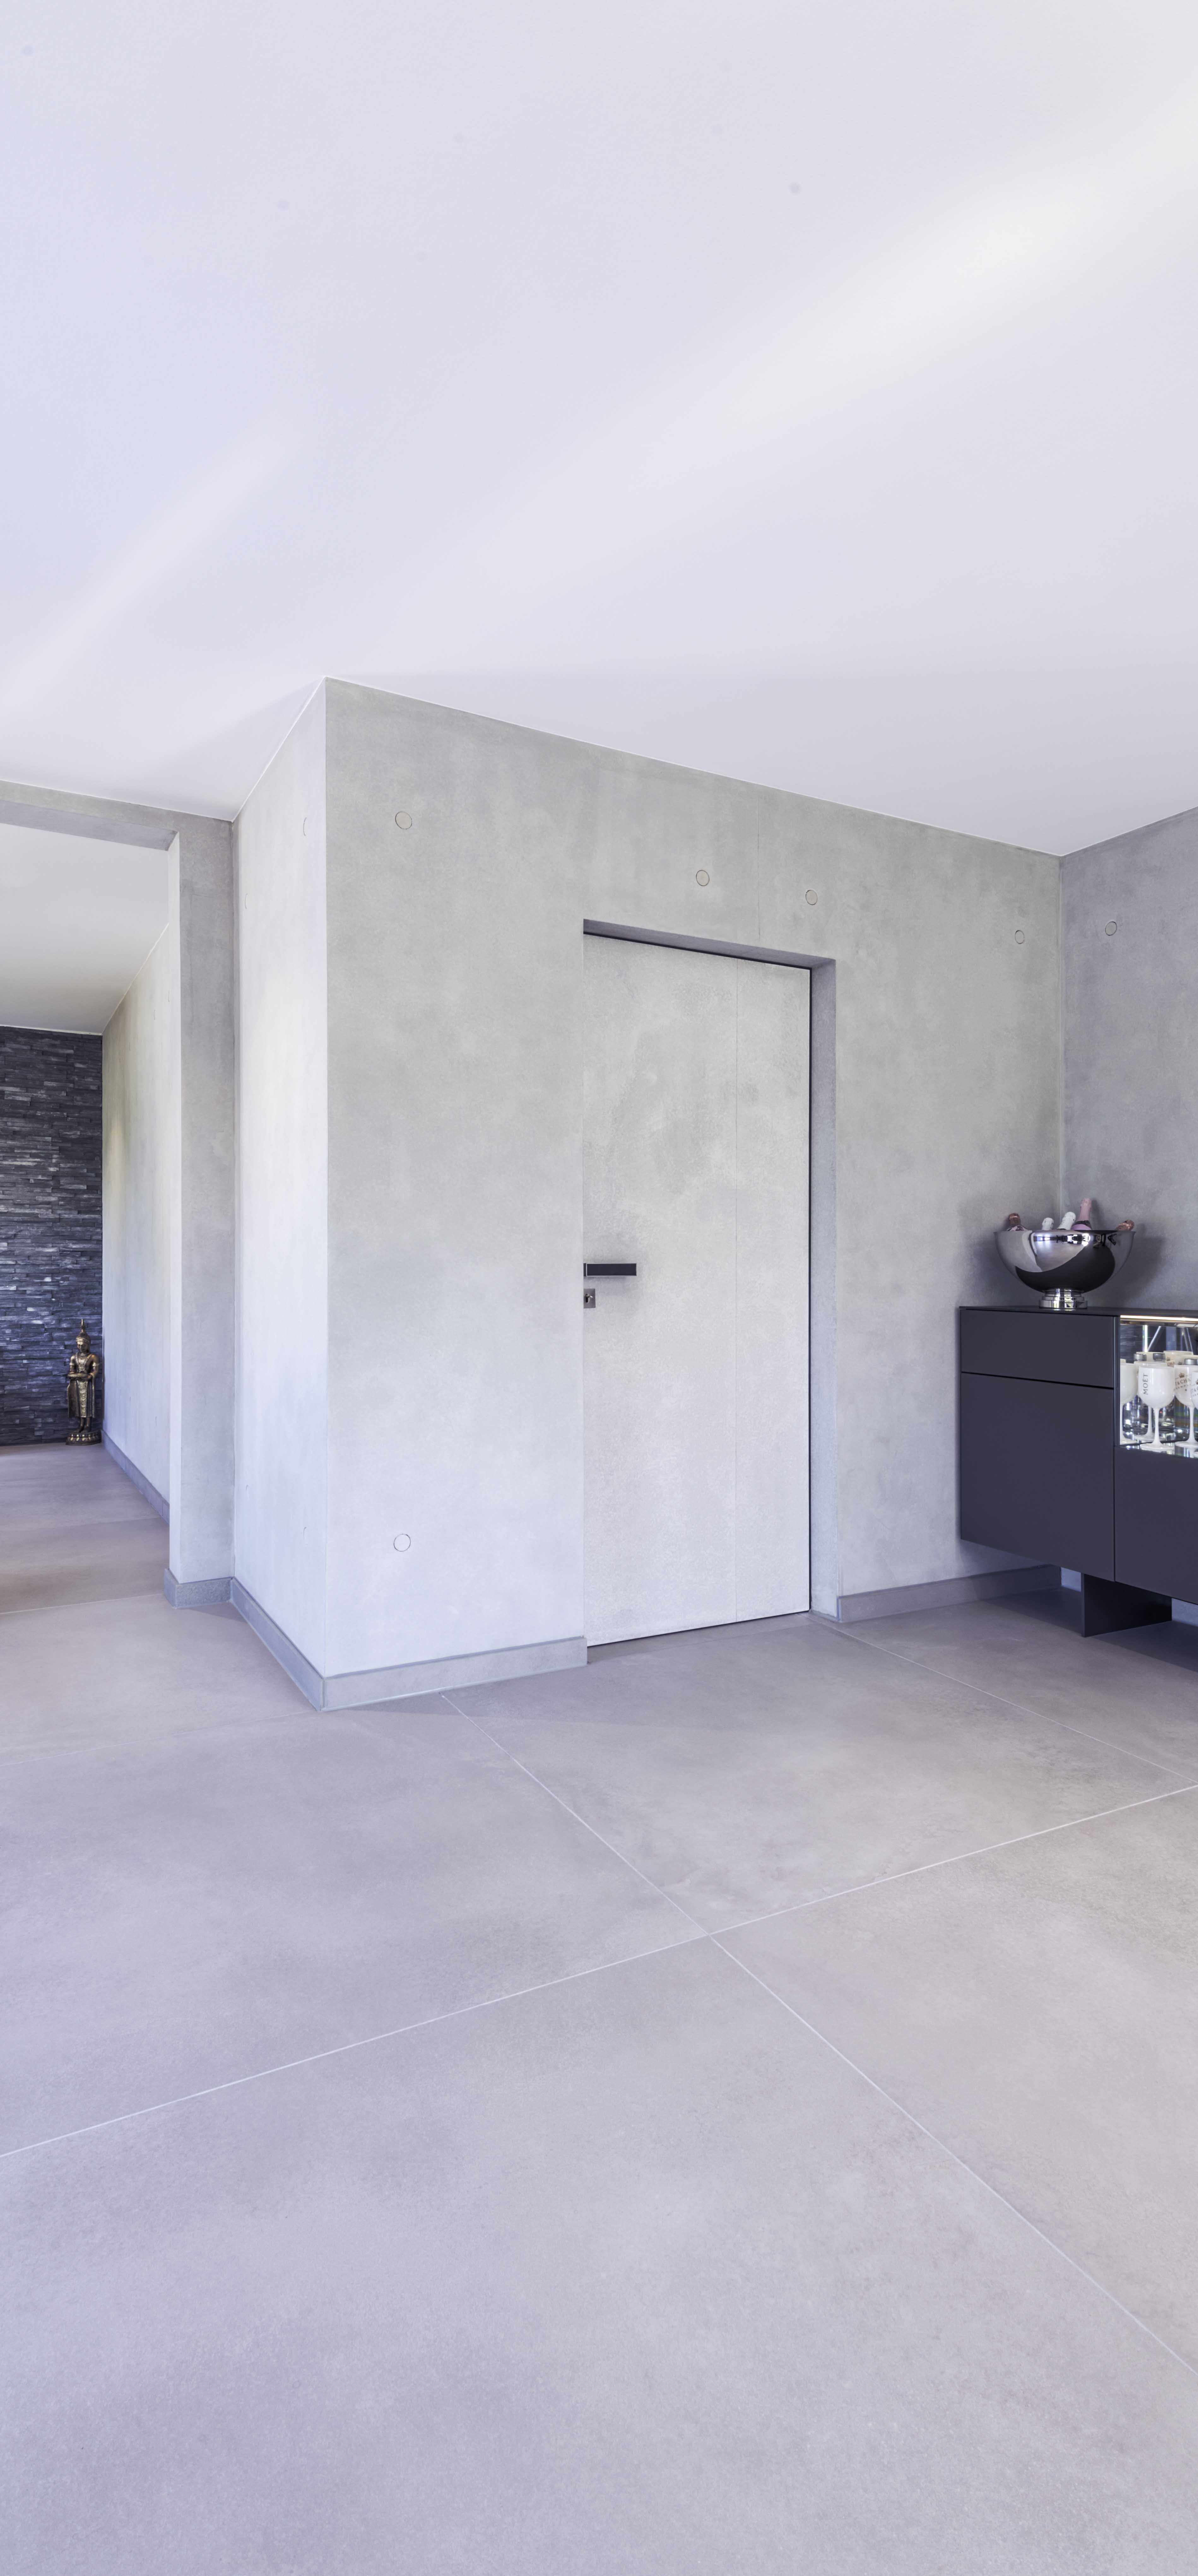 The illustration shows the plain entrance area in concrete look. From there, a Vitadoor Modulwerk 1.0. door with black anodized frame and the Frame door handle leads into the interior of the house. 